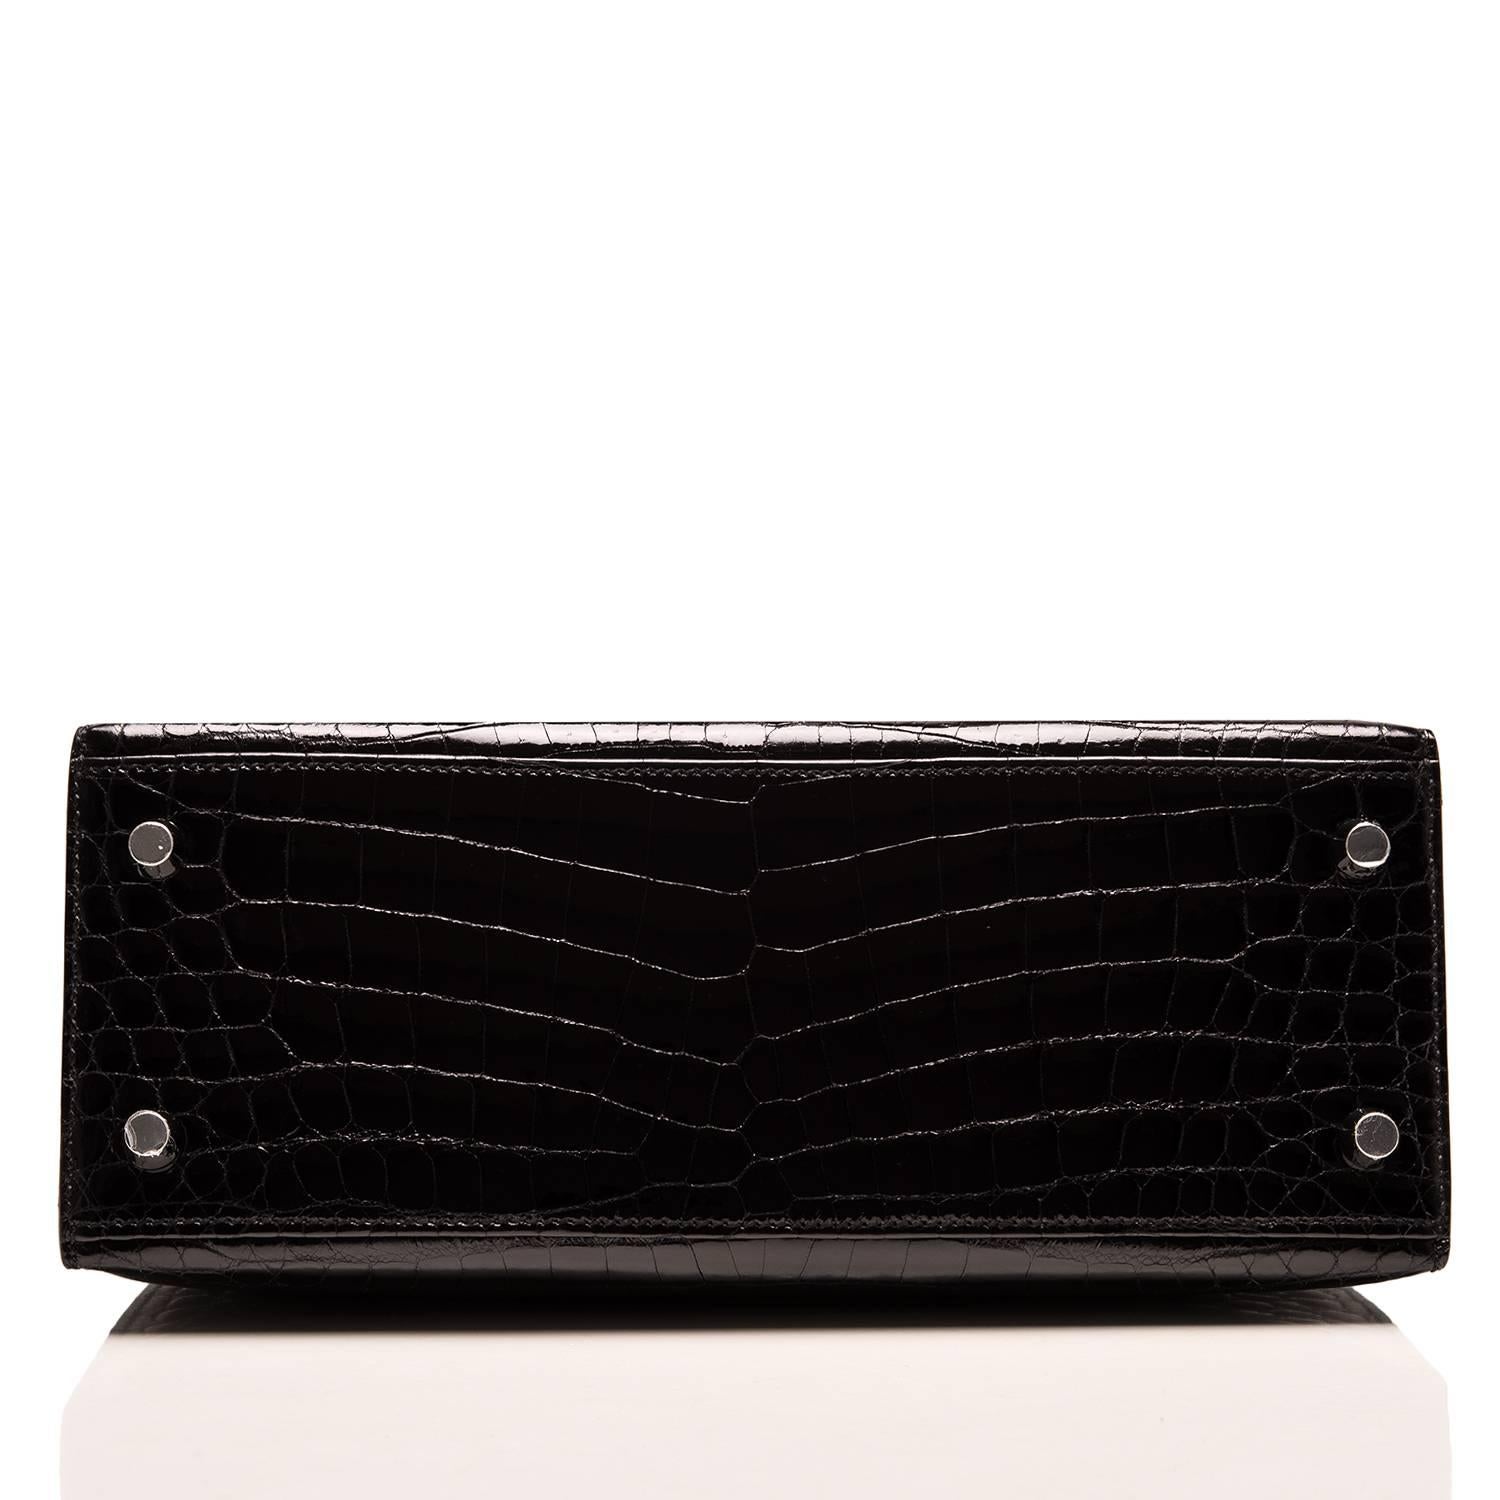 Hermes Black Shiny Niloticus Crocodile Kelly Sellier 25cm In New Condition For Sale In New York, NY